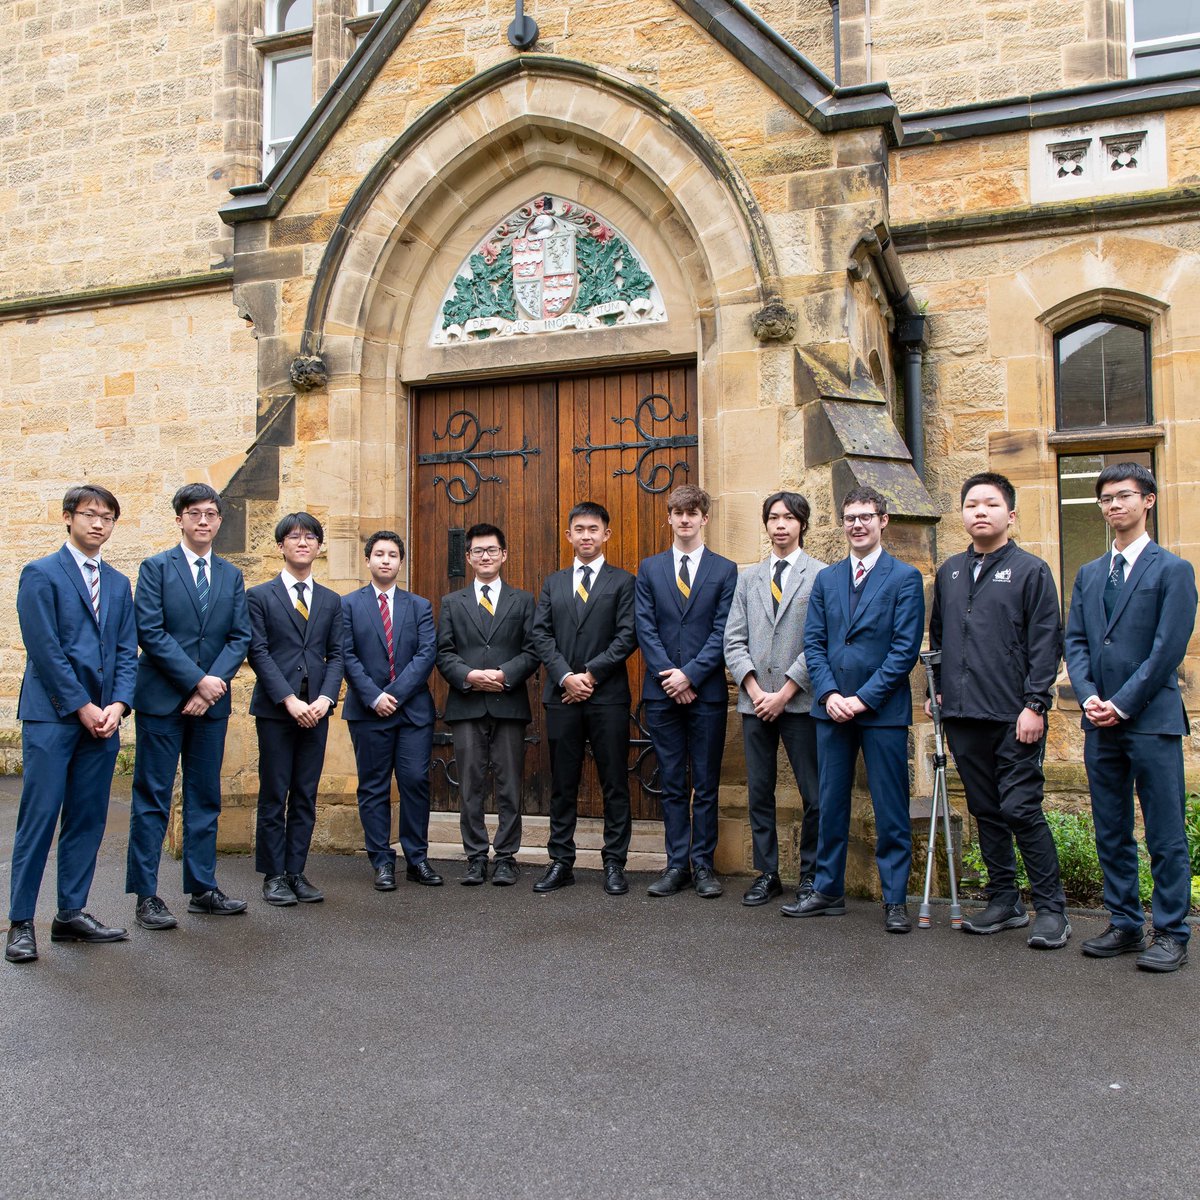 Tonbridge boys have once more come top in the Trinity Maths Competition, a global contest which tests students’ problem-solving skills under time pressure. Read more - tonbridge-school.co.uk/about/news/pos…